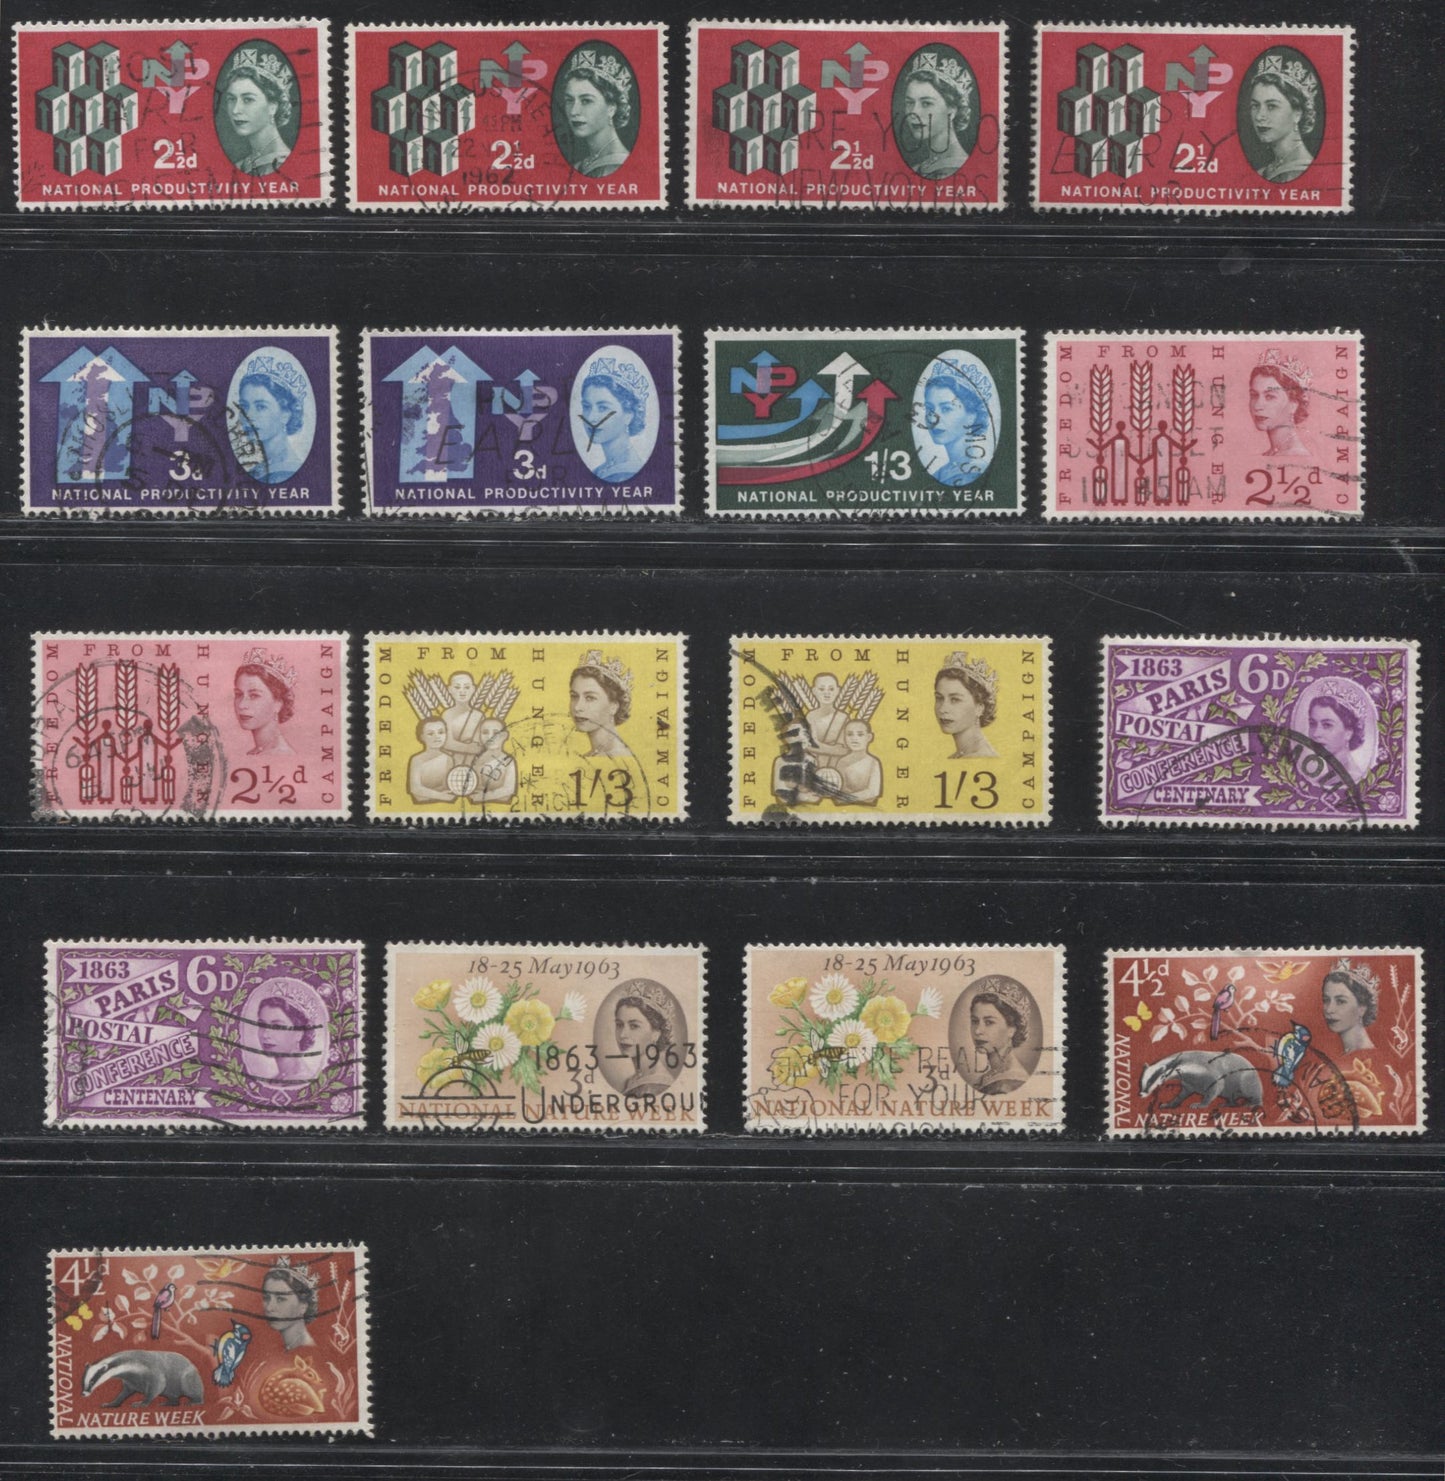 Great Britain #387-401 (SG631-645) 1962-1963 Commemoratives, A Specialized Mostly Very Fine Used Lot of 29 Stamps, Many Shade and Fluorescent Paper Varieties